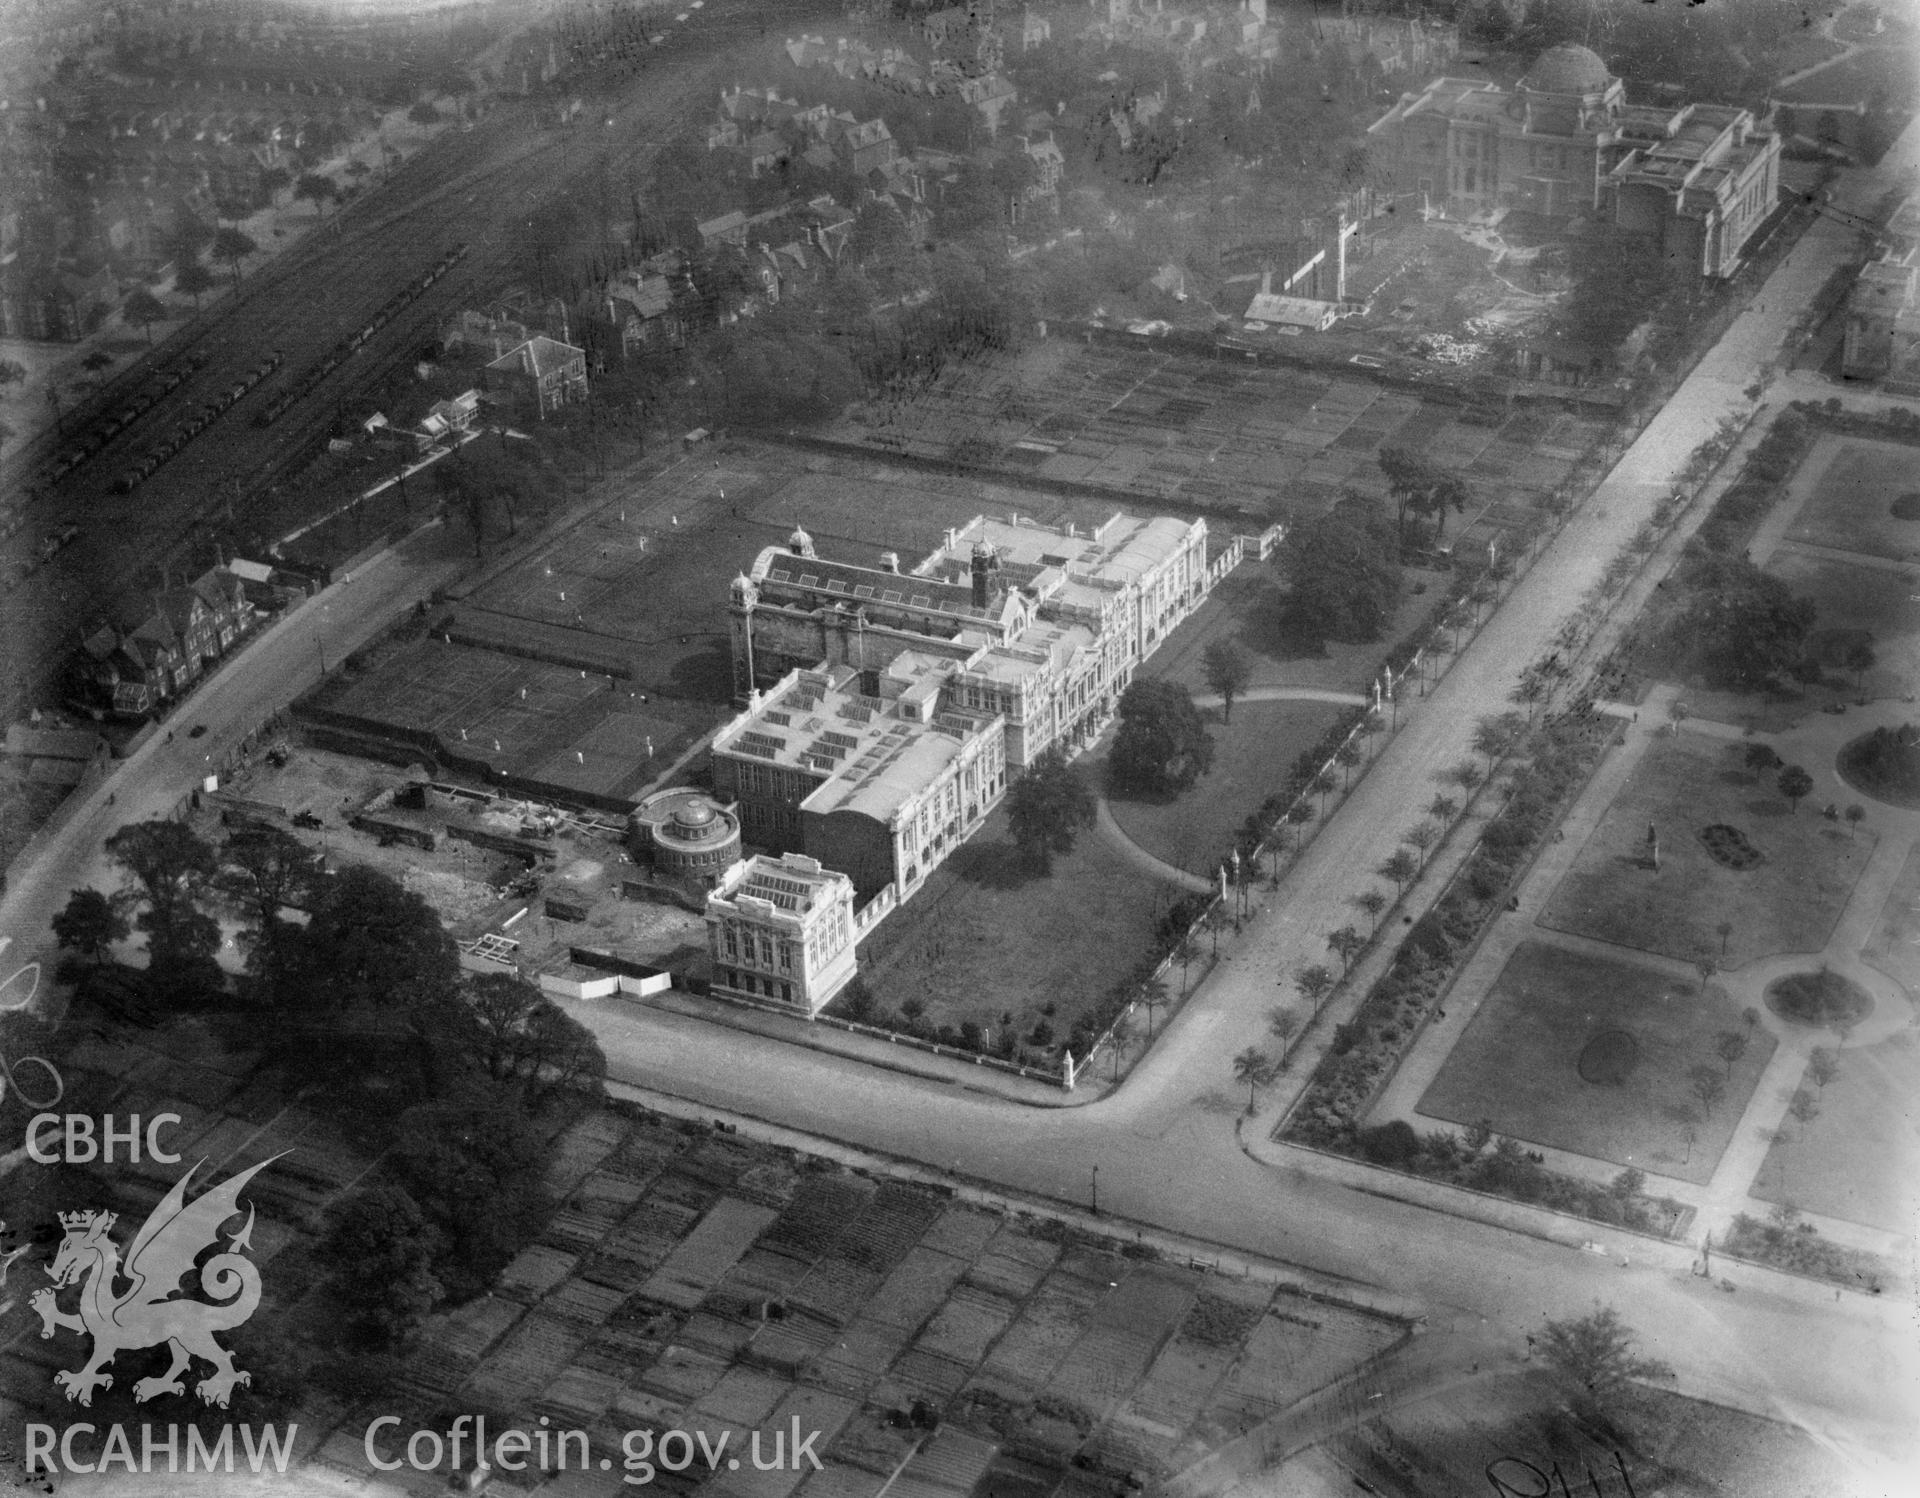 View of Cathays Park, Cardiff, showing University buildings and the National Museum under construction, oblique aerial view. 5?x4? black and white glass plate negative.